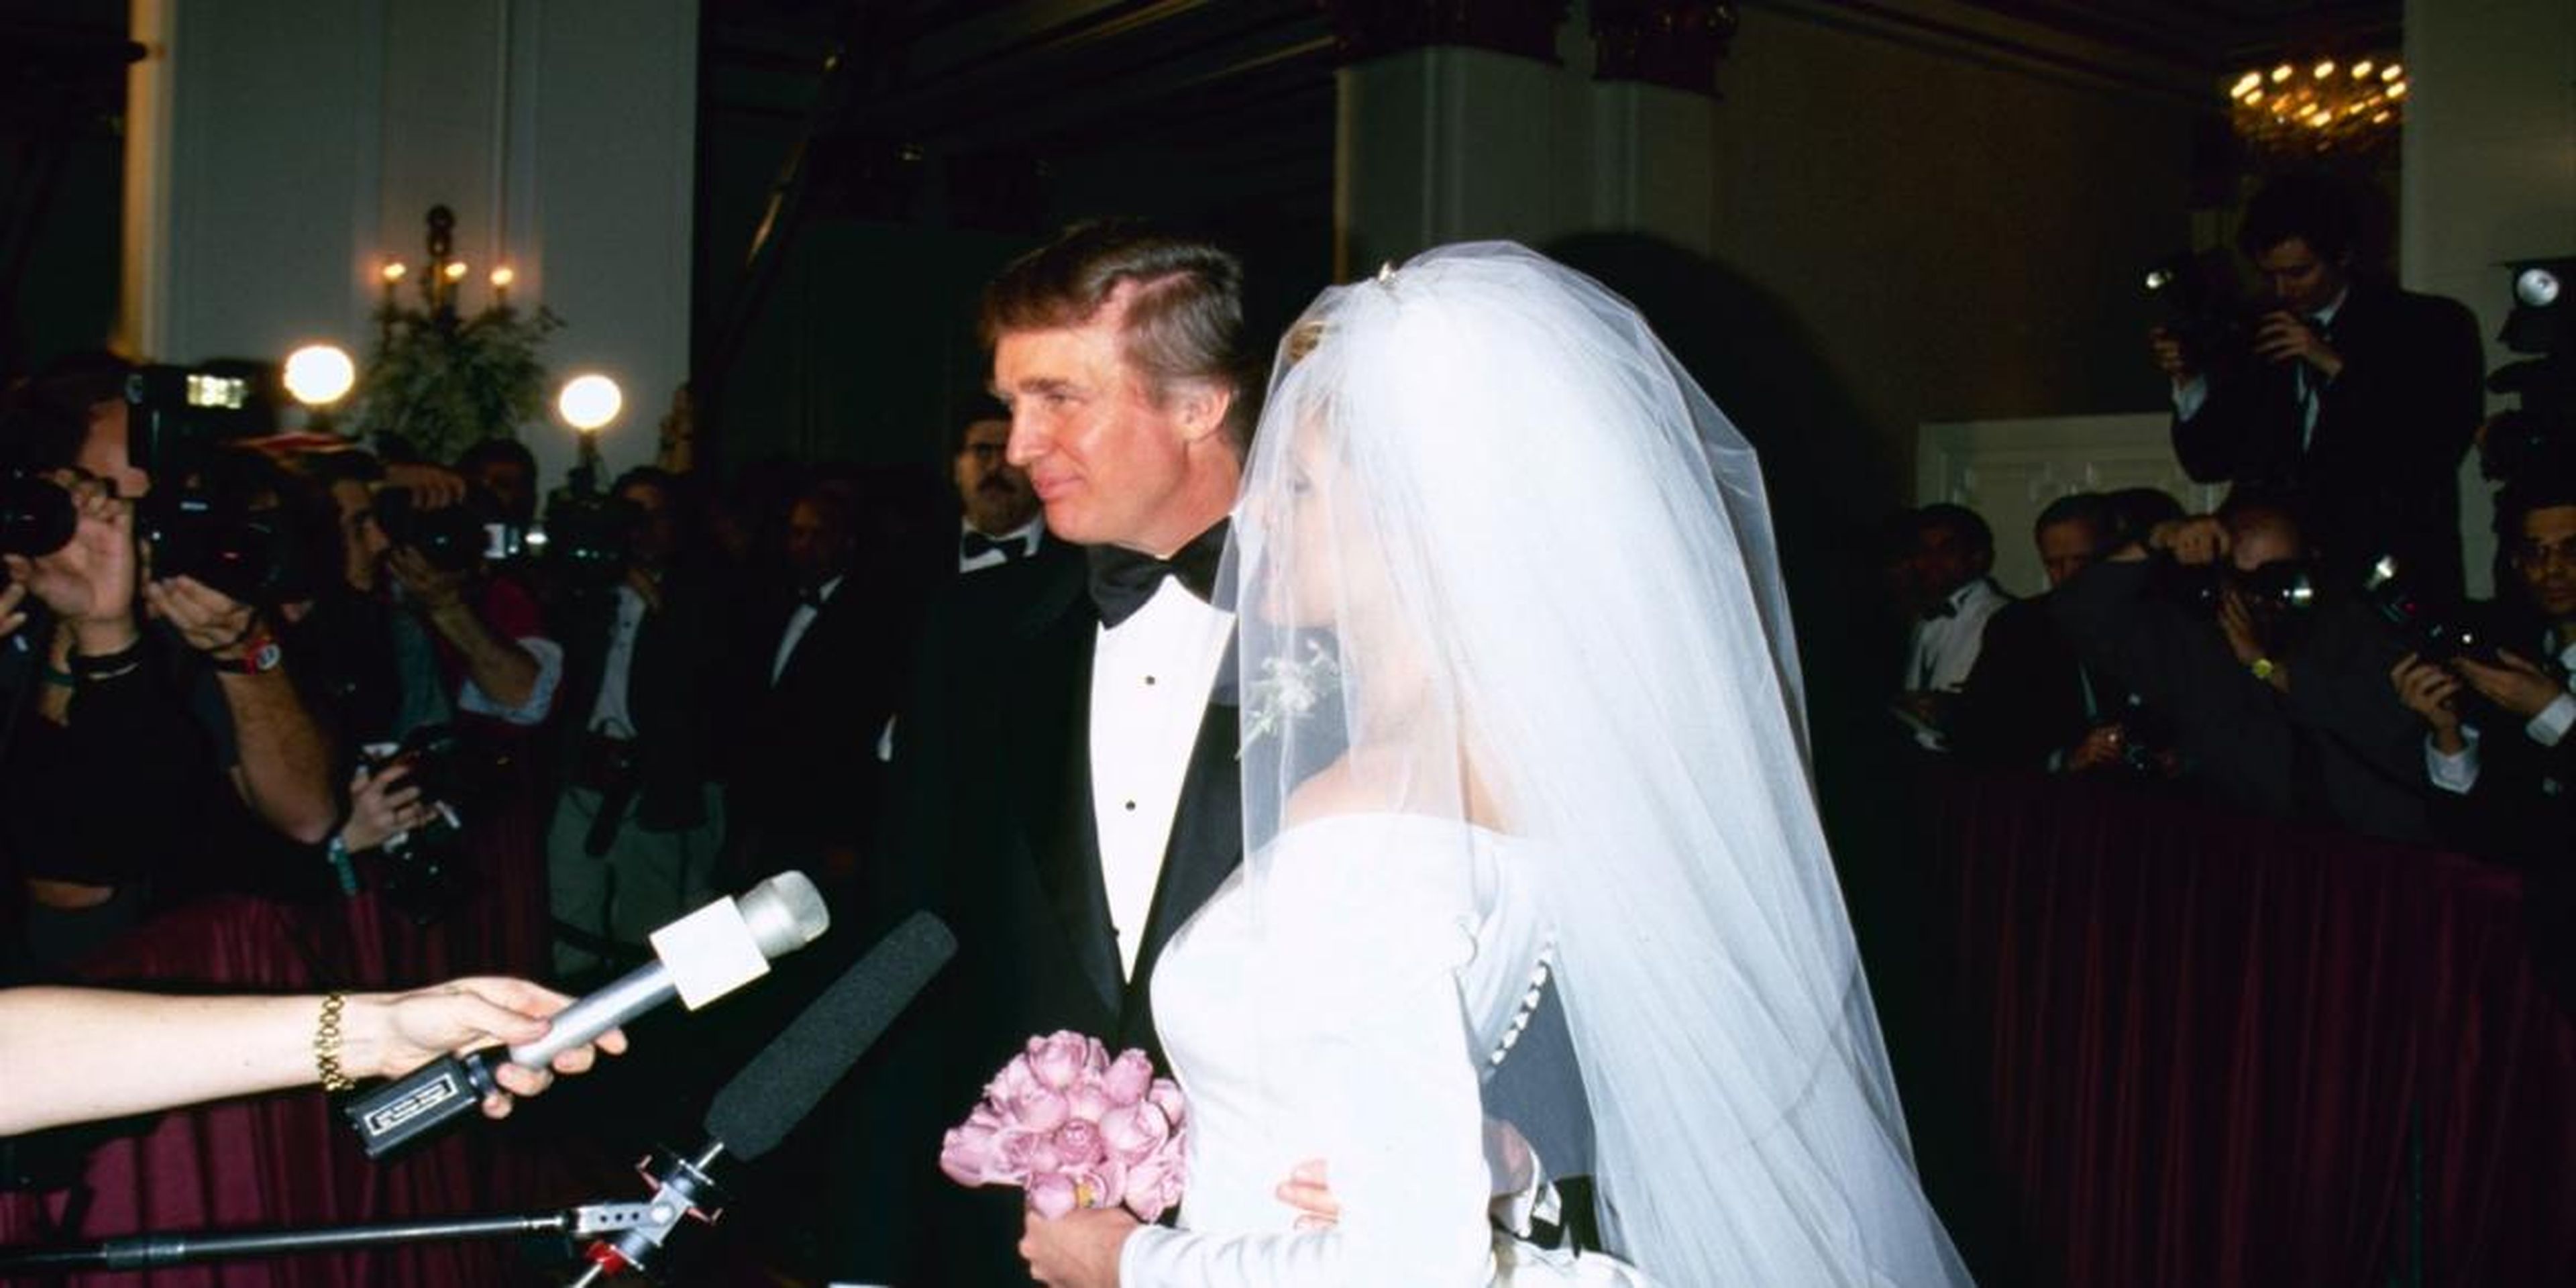 The wedding of Marla Maples and entrepreneur Donald Trump, New York City, 20th December 1993.